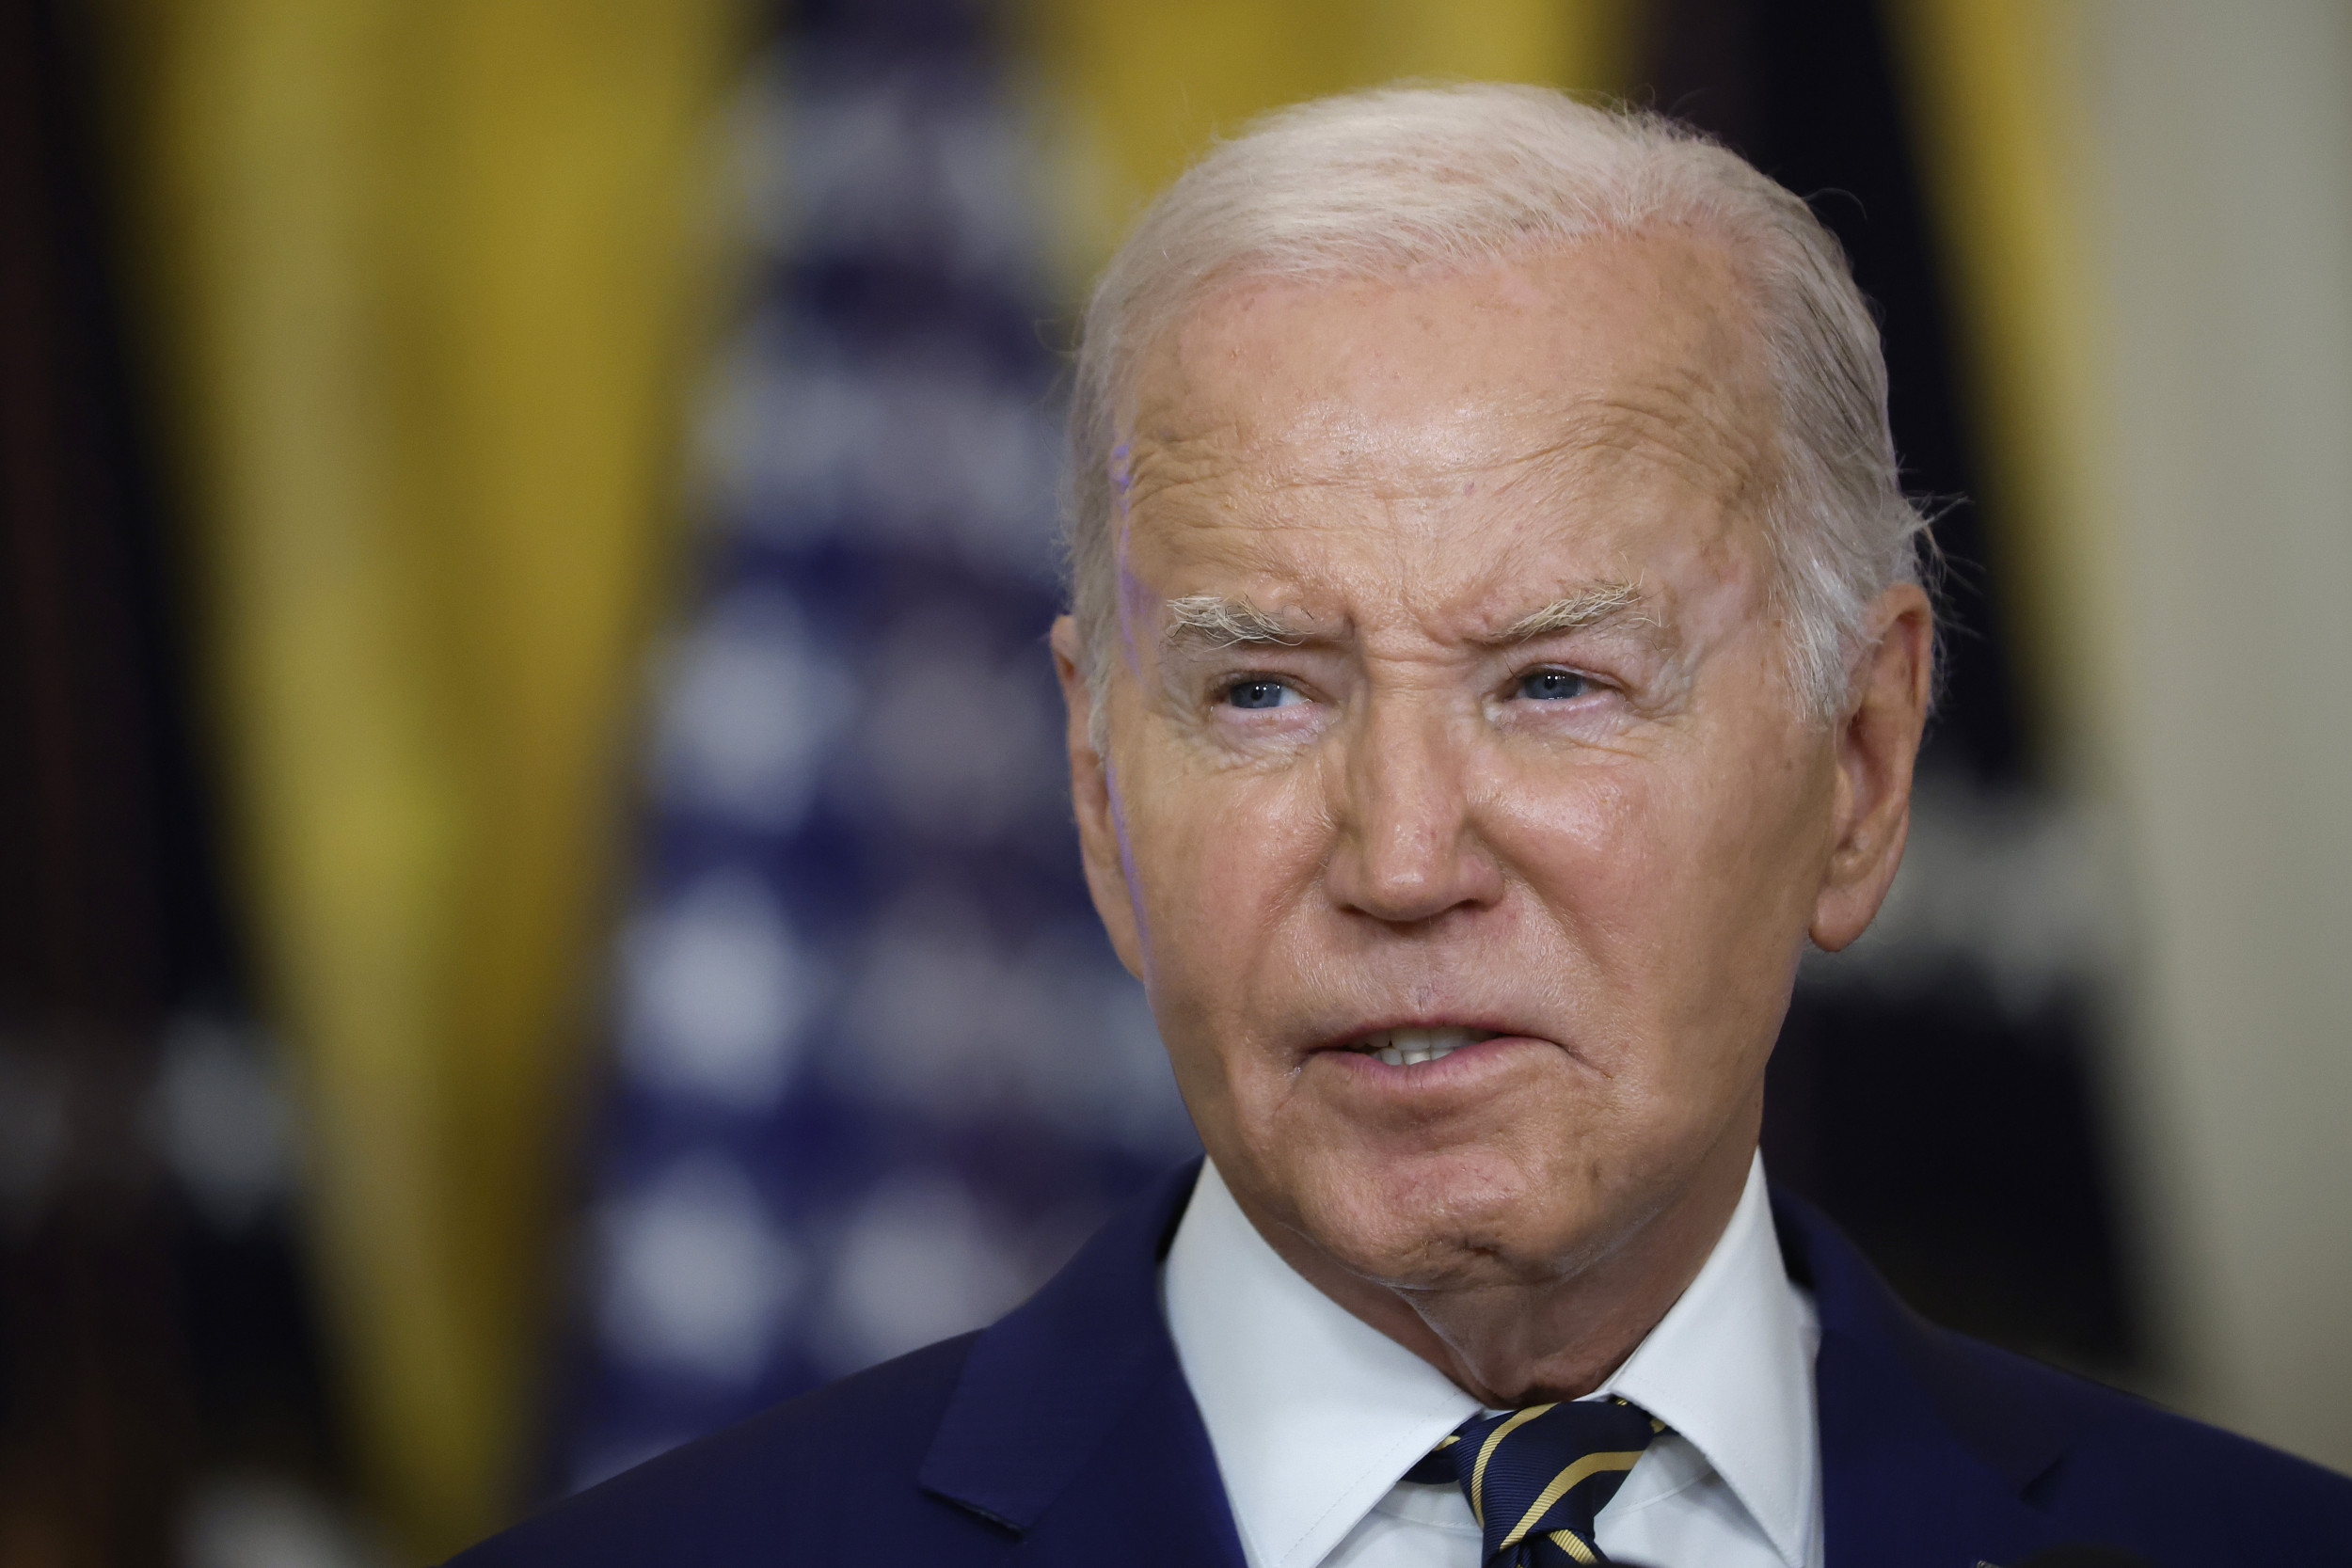 Video of Joe Biden Appearing To Freeze at Event Raises